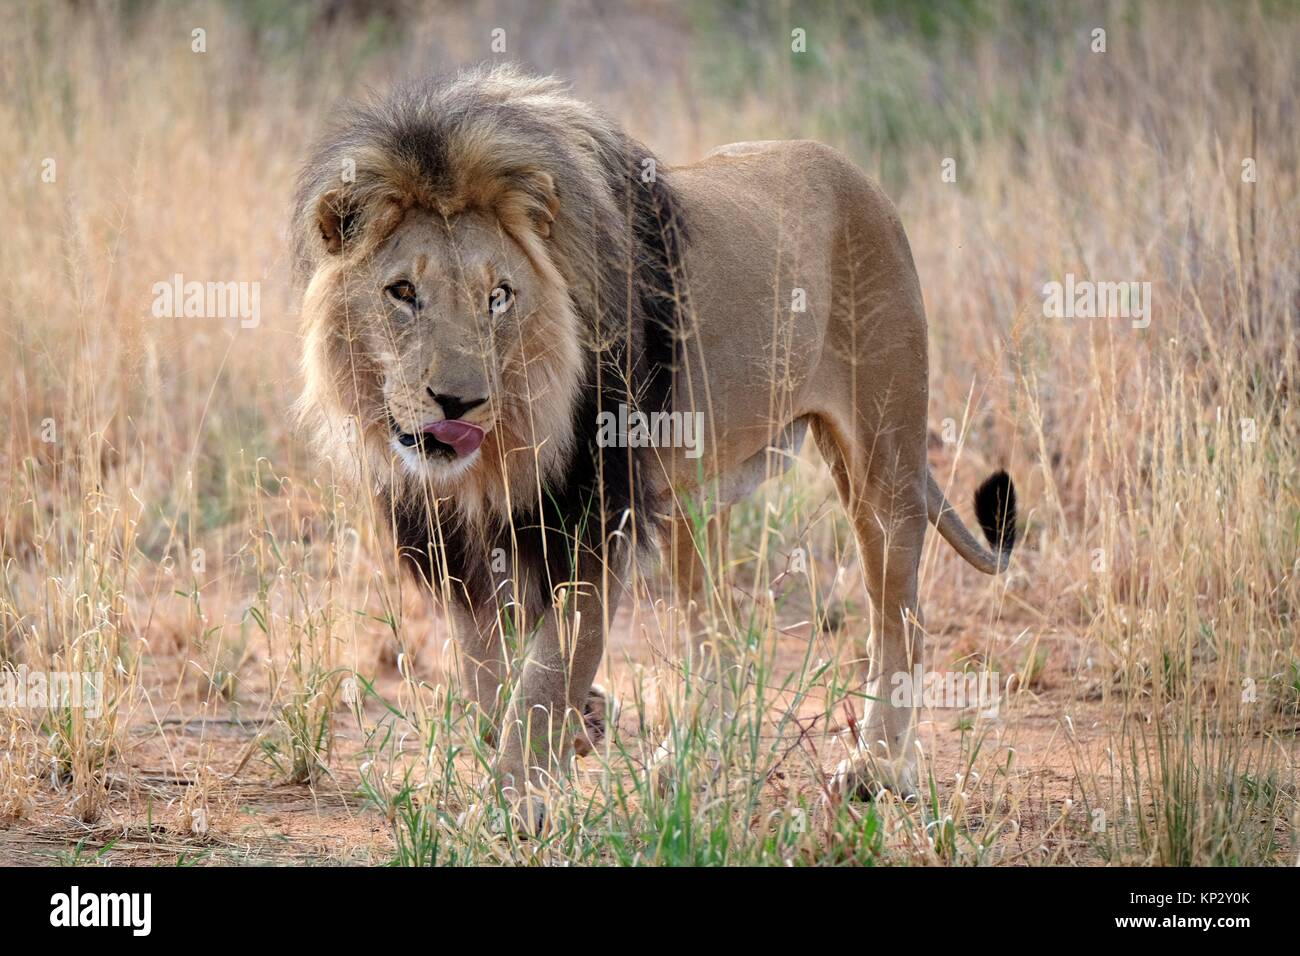 Full-grown male African lion (Panthera leo) standing in the grass, Africat Centre, Namibia Stock Photo